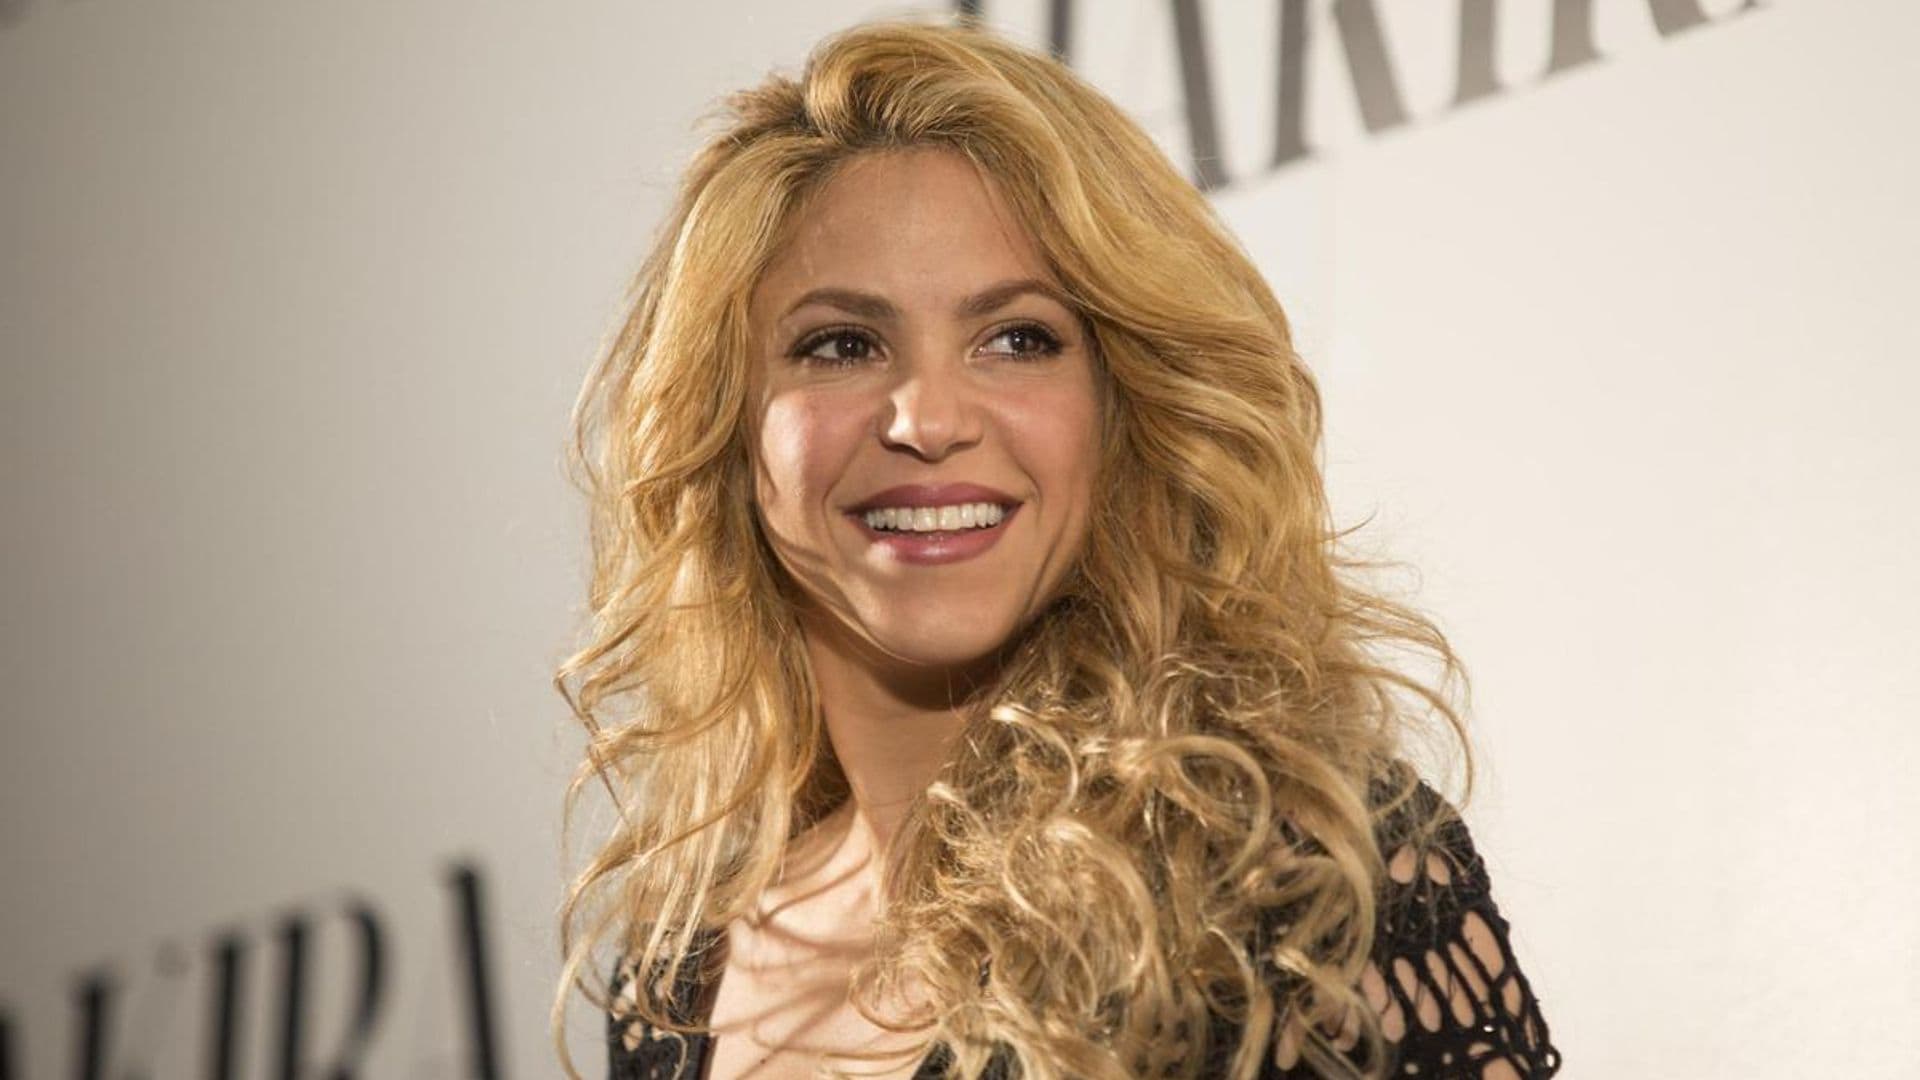 Shakira’s song ‘Nassau’ hints at a new love interest: Is she dating again?